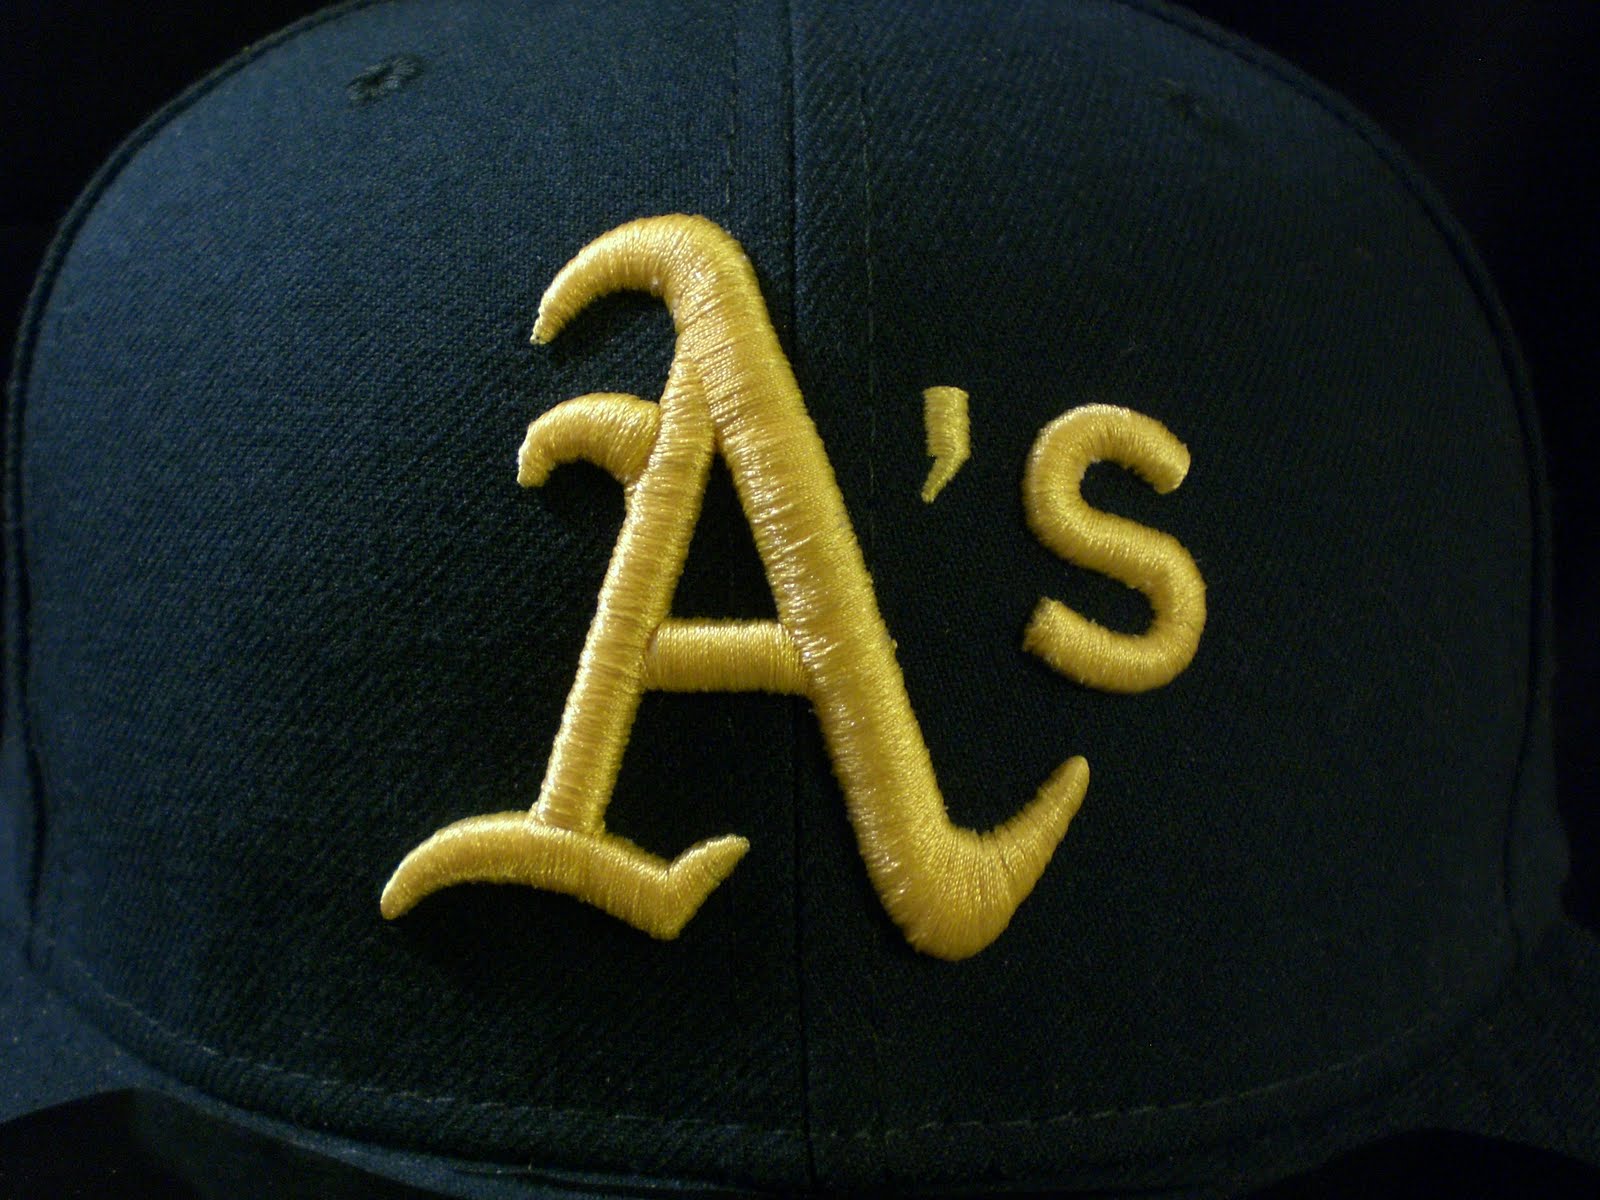 Embroidery & Fitteds: Oakland Athletics Road